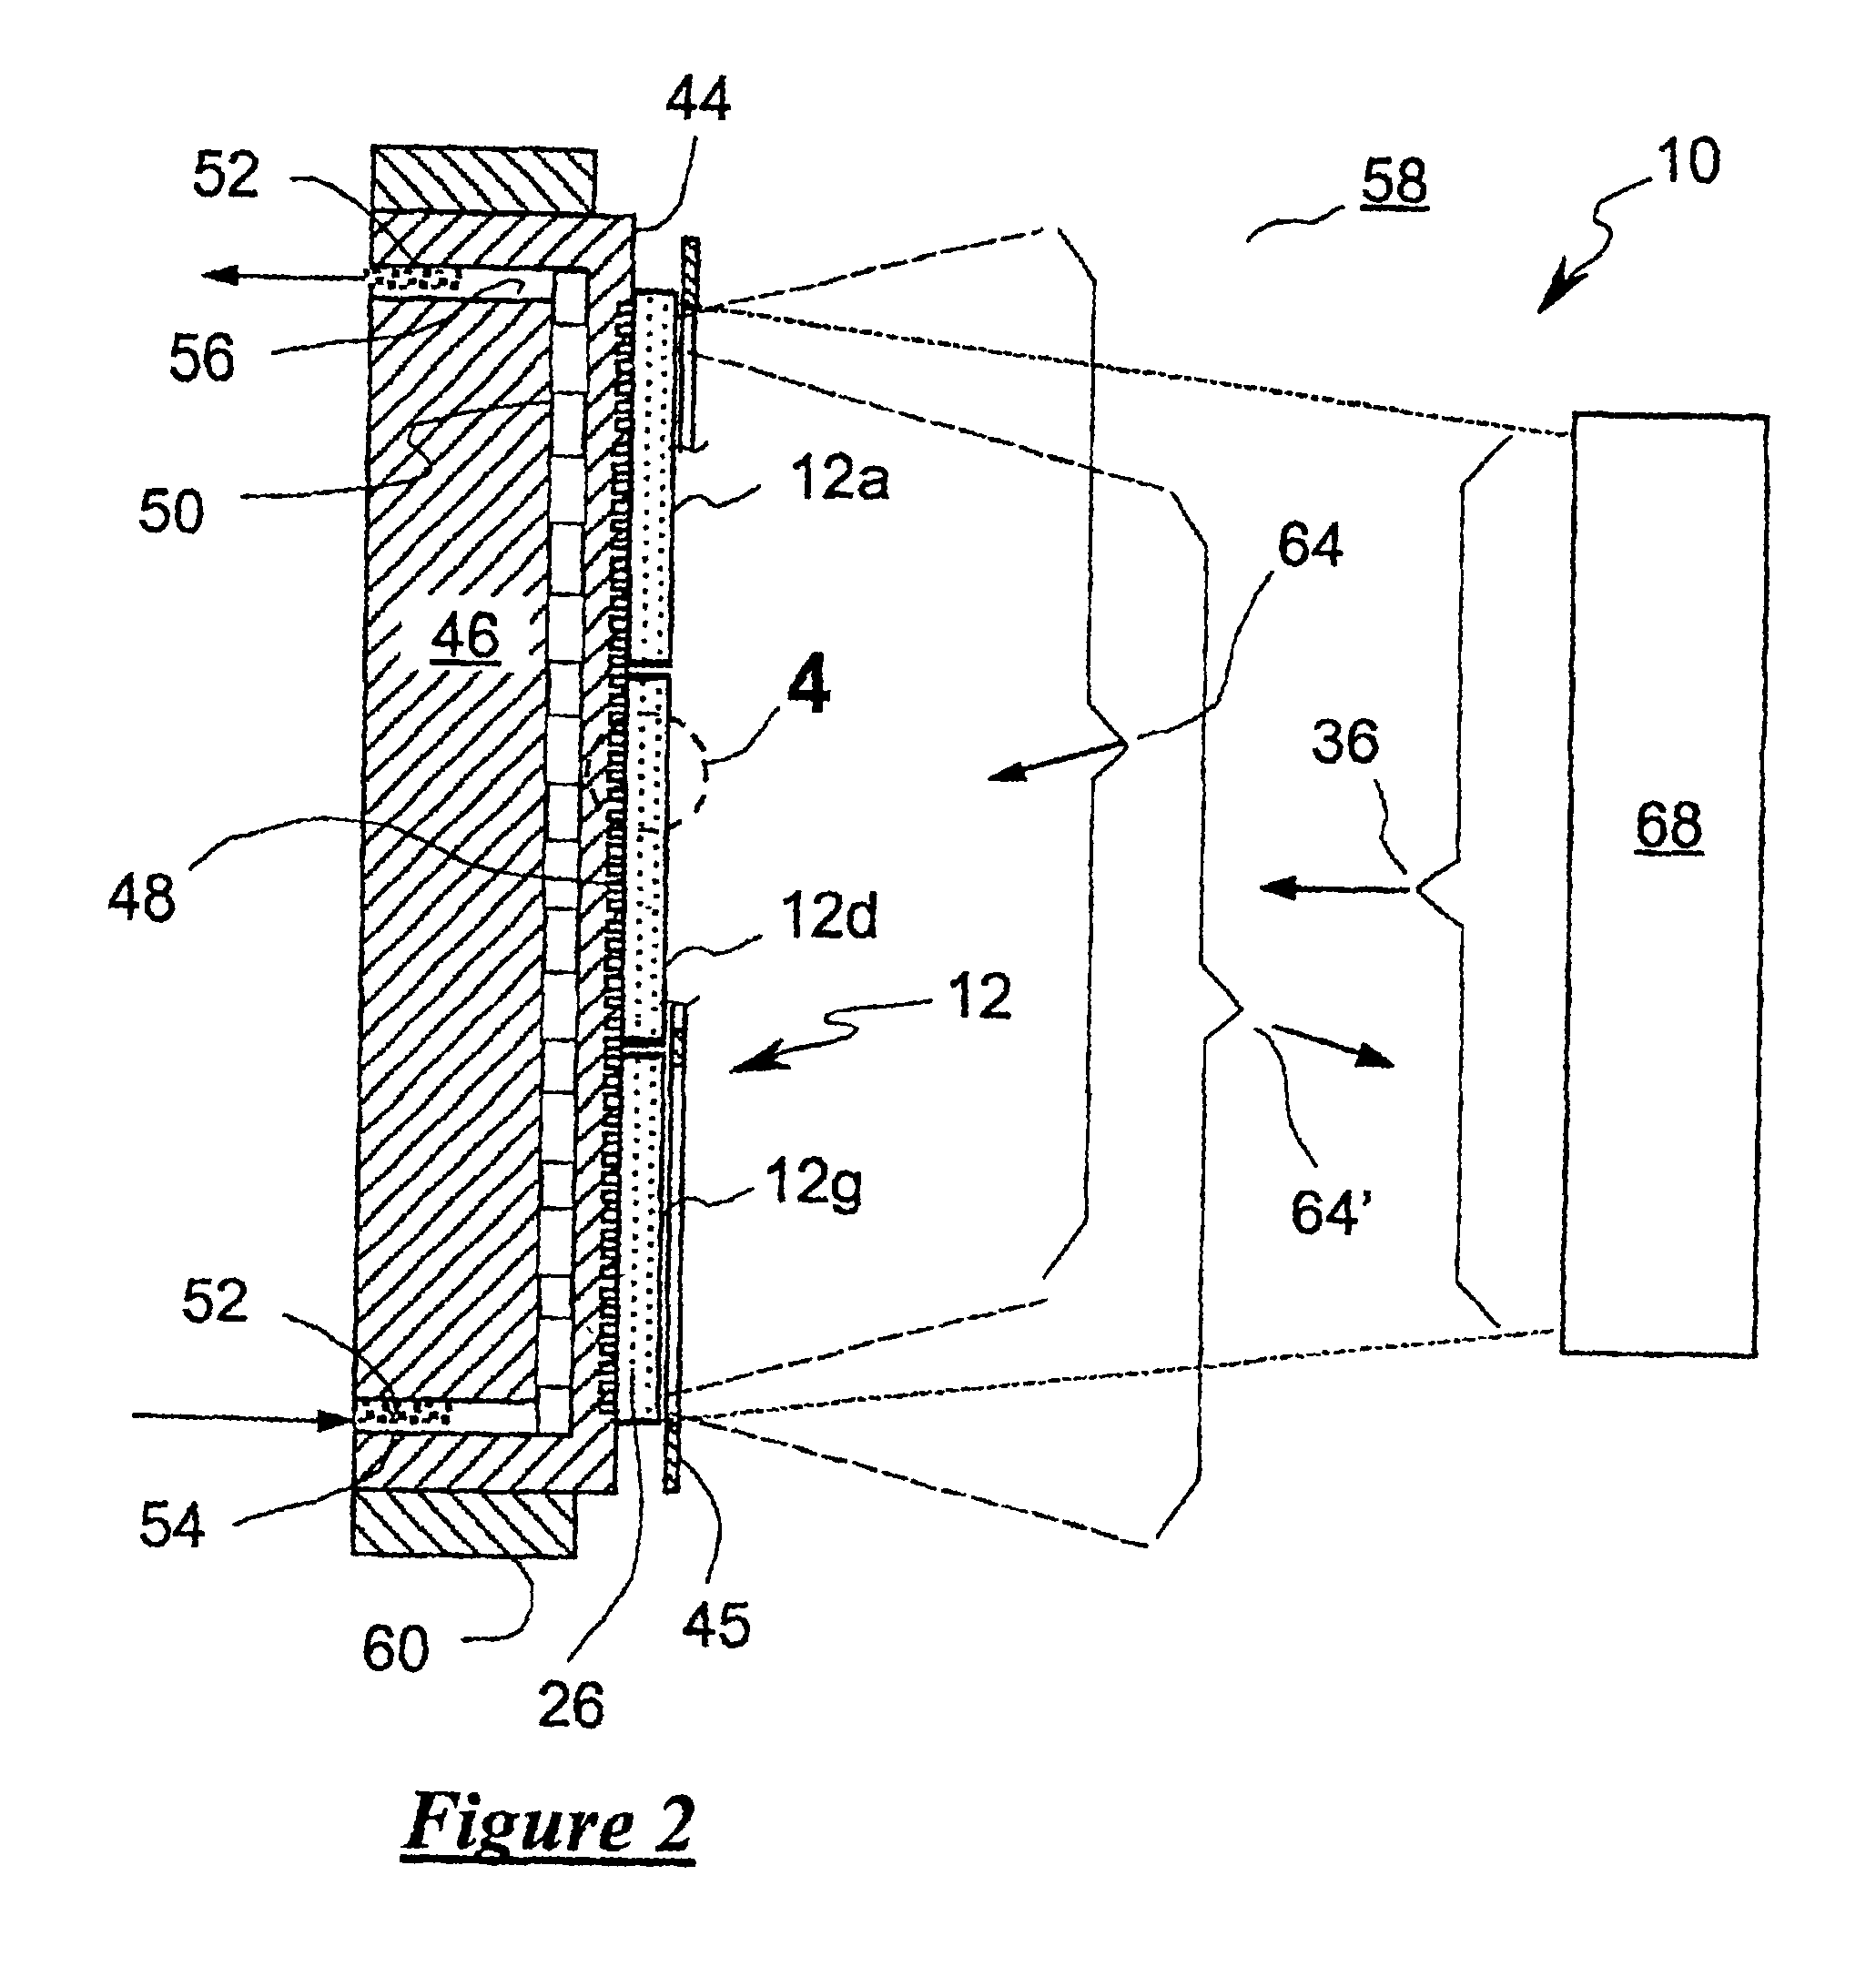 High-average power active mirror solid-state laser with multiple subapertures